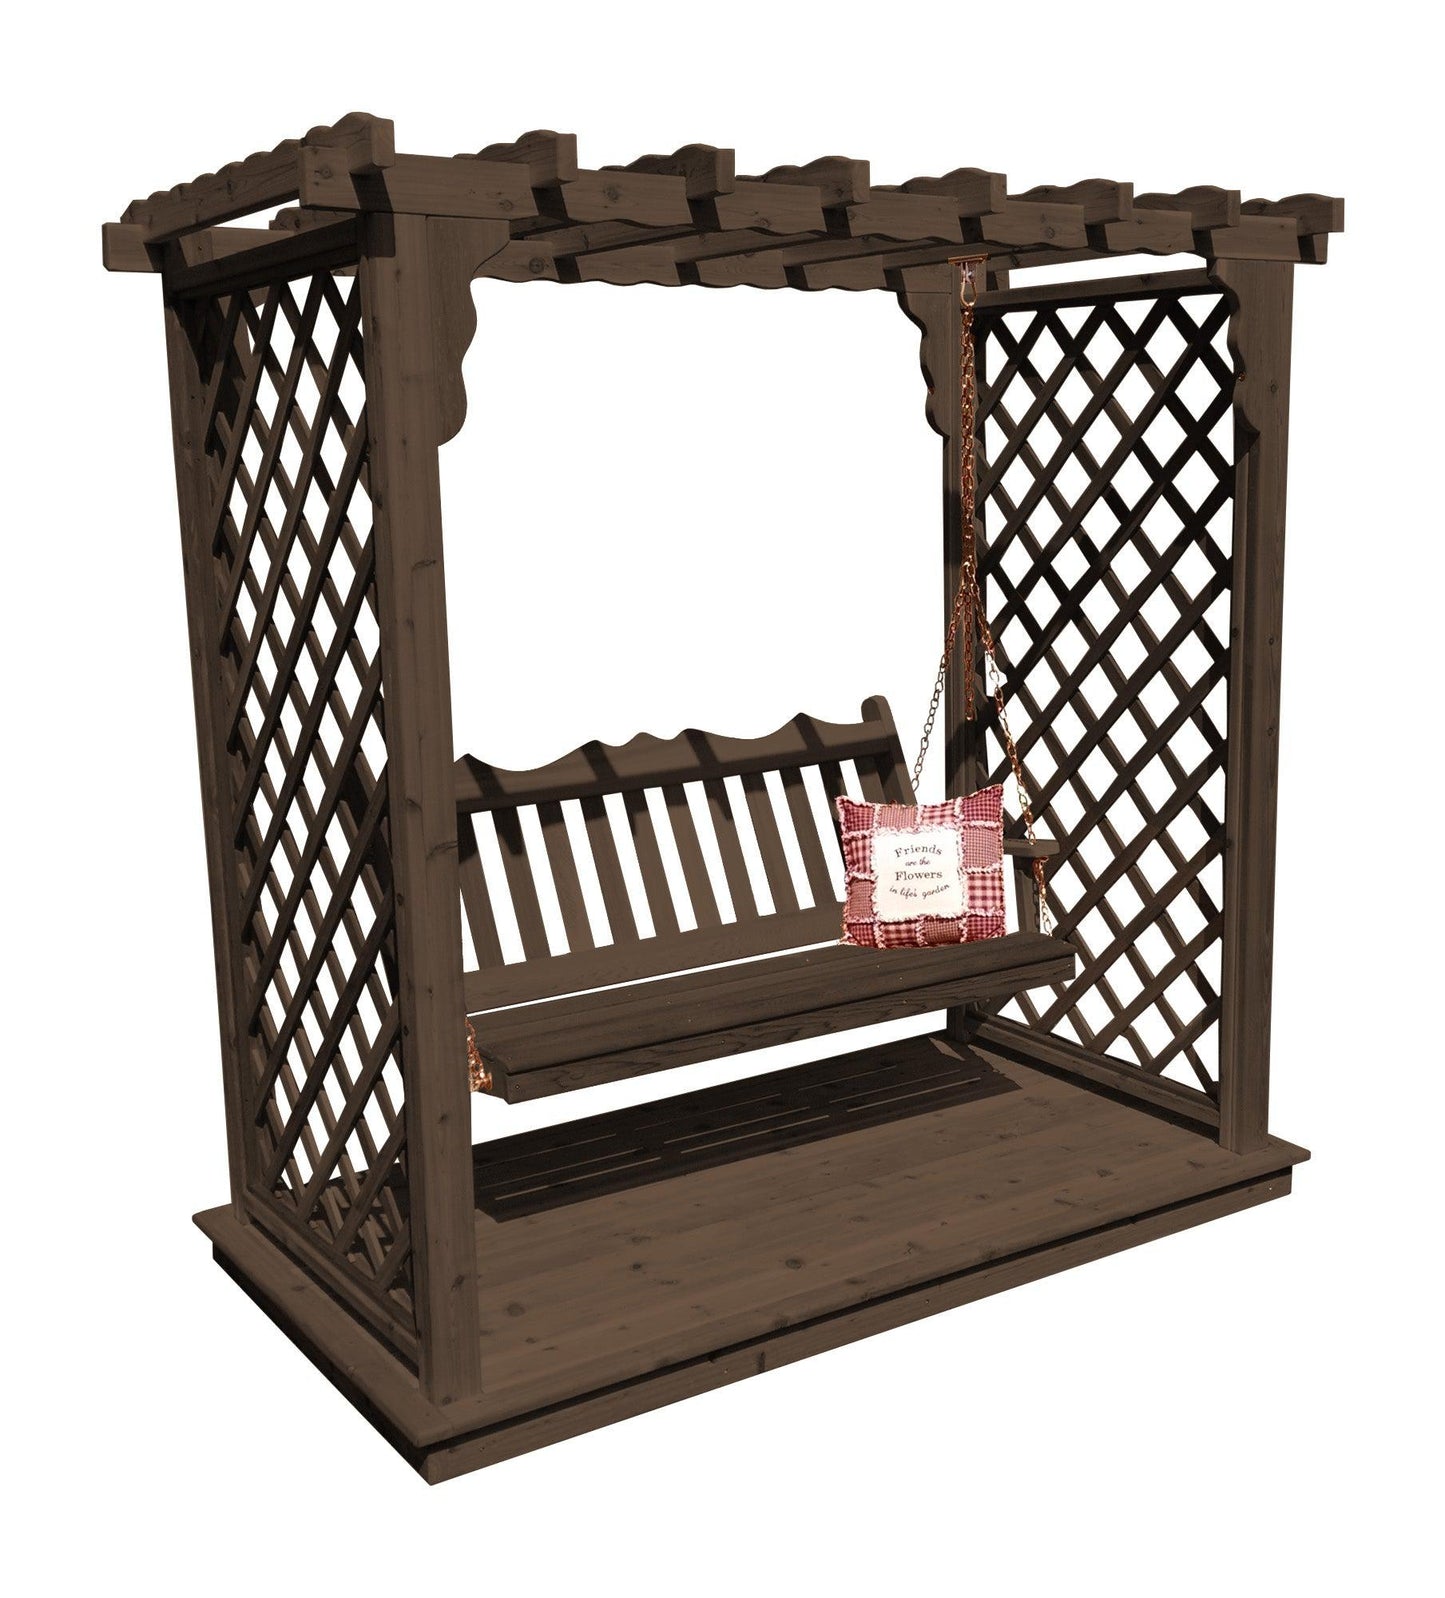 A&L FURNITURE CO. 6' Covington Pressure Treated Pine Arbor w/ Deck & Swing - LEAD TIME TO SHIP 10 BUSINESS DAYS